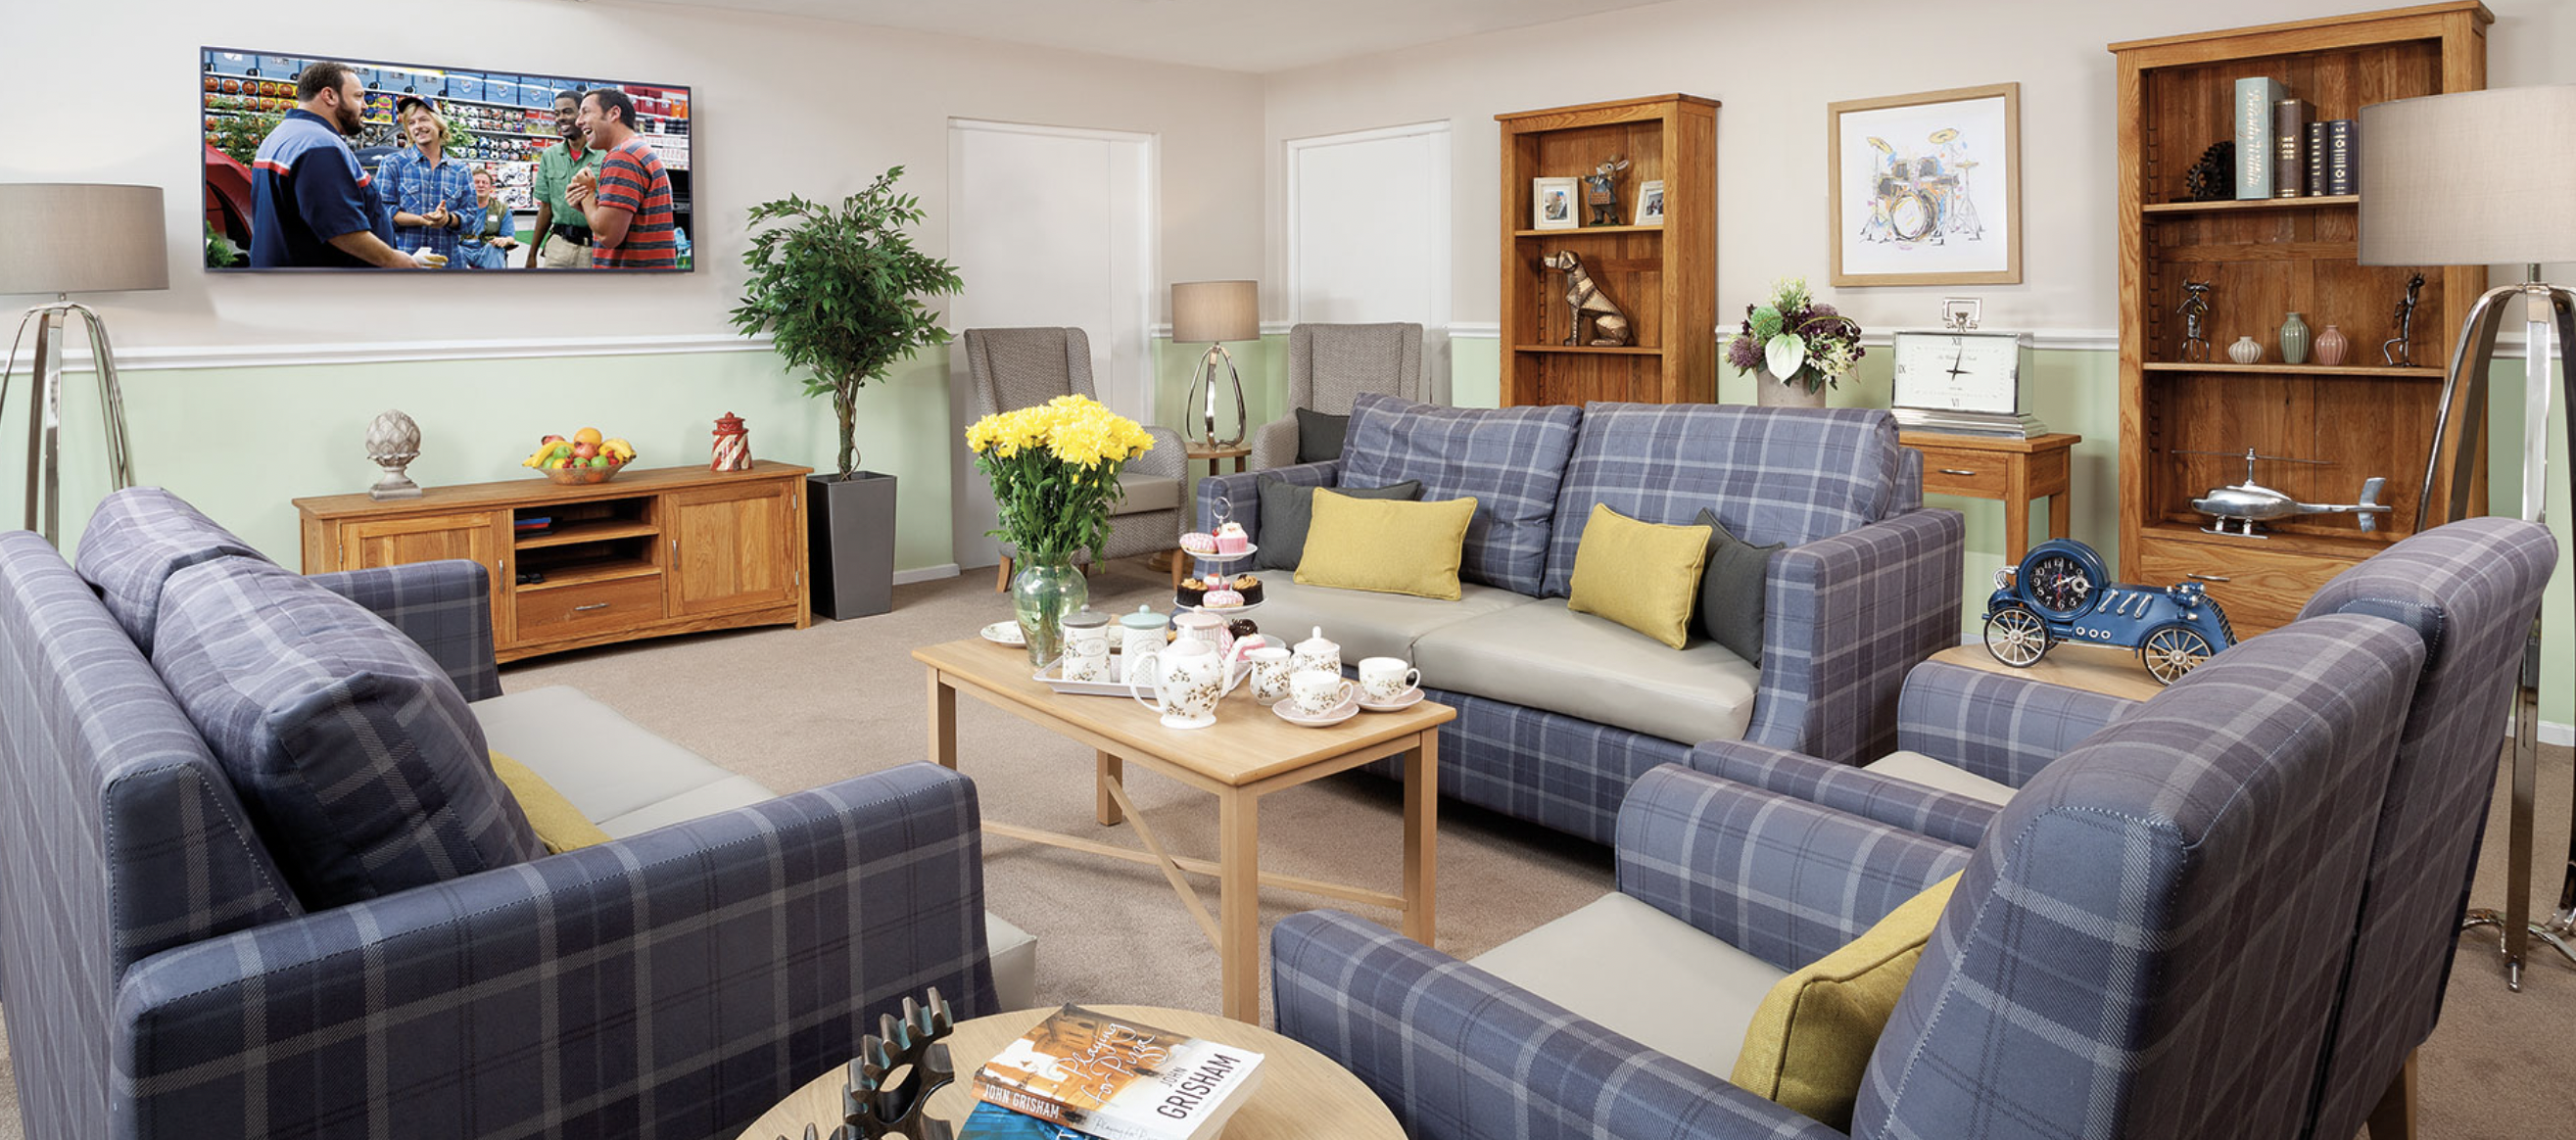 Wrottesley Park House  care home